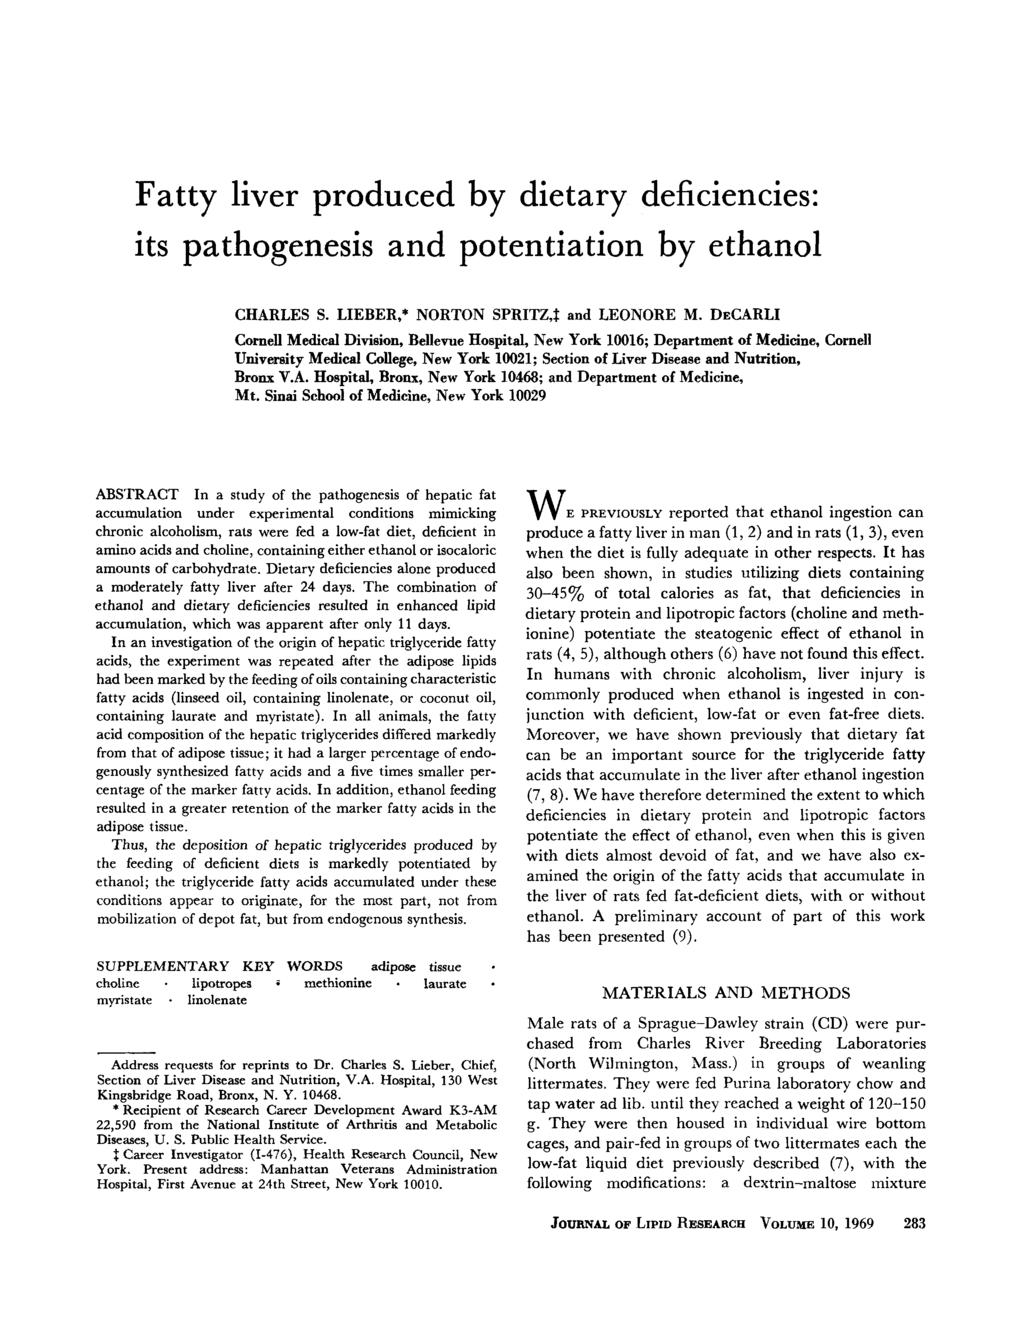 Fatty liver produced by dietary deficiencies: its pathogenesis and potentiation by ethanol CHARLES S. LIEBER,* NORTON SPRITZJ and LEONORE M.